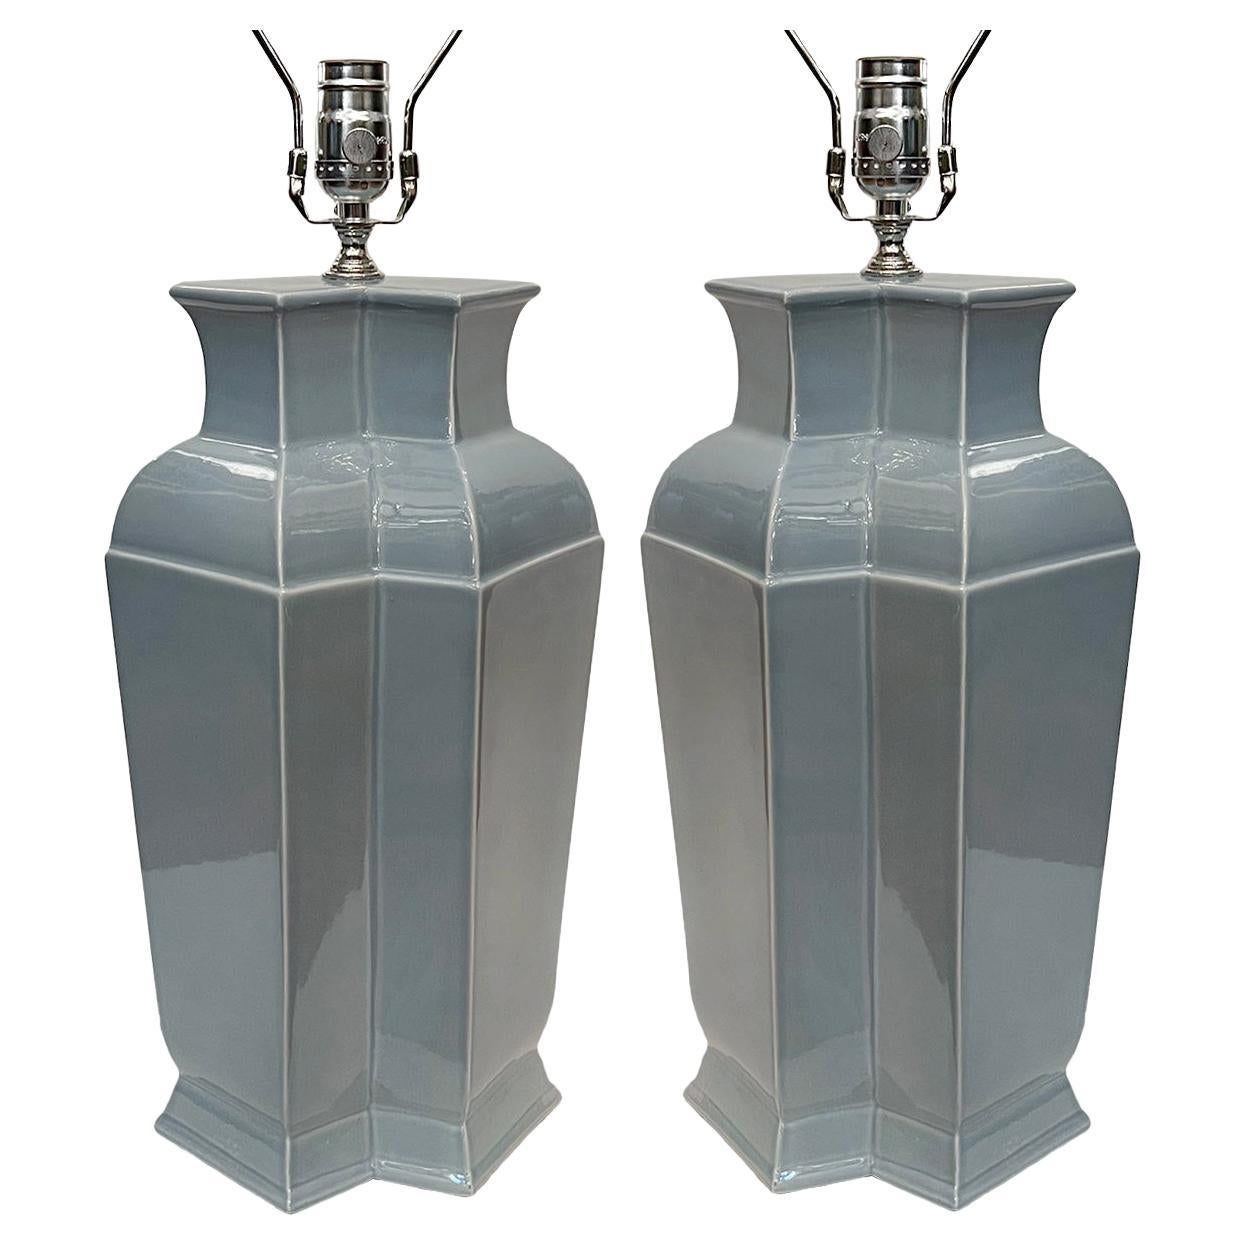 Pair of Porcelain Table Lamps